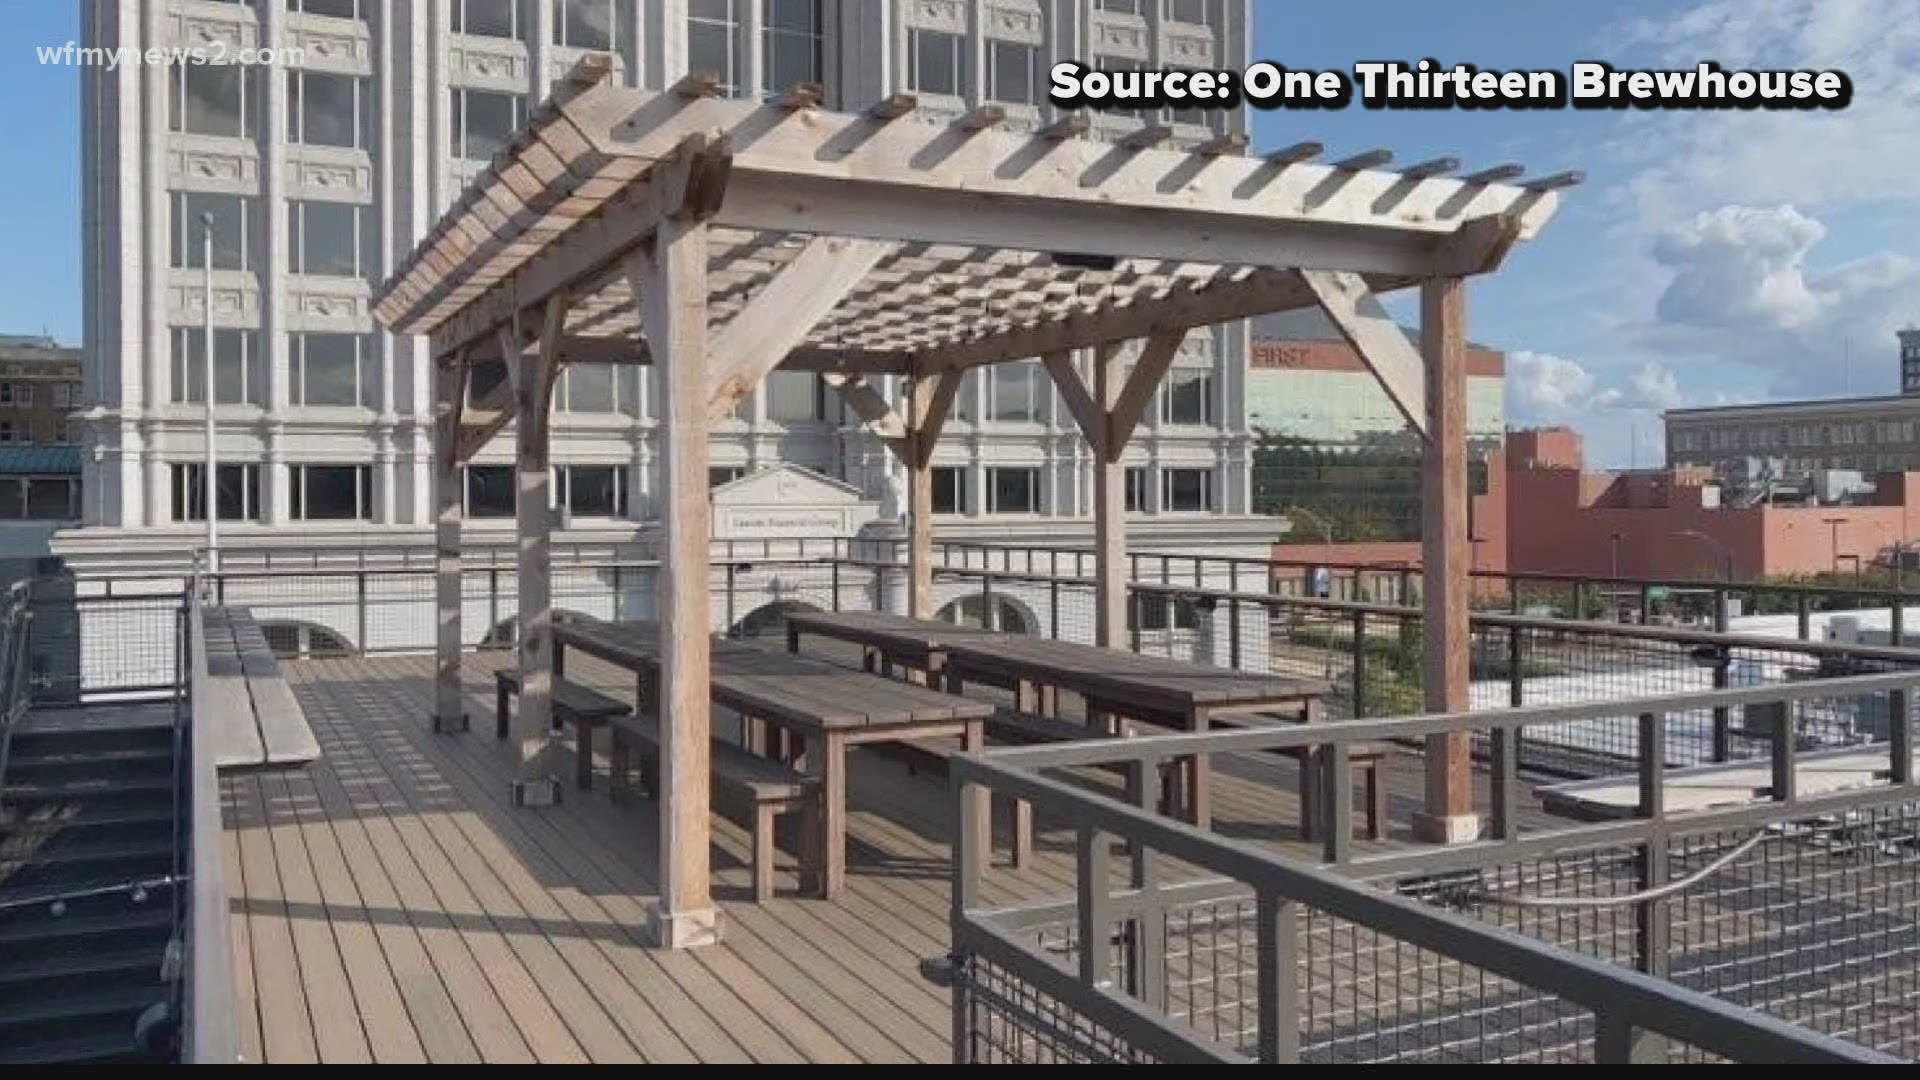 Onethirteen brewhouse is opening in Greensboro despite still being in a pandemic.